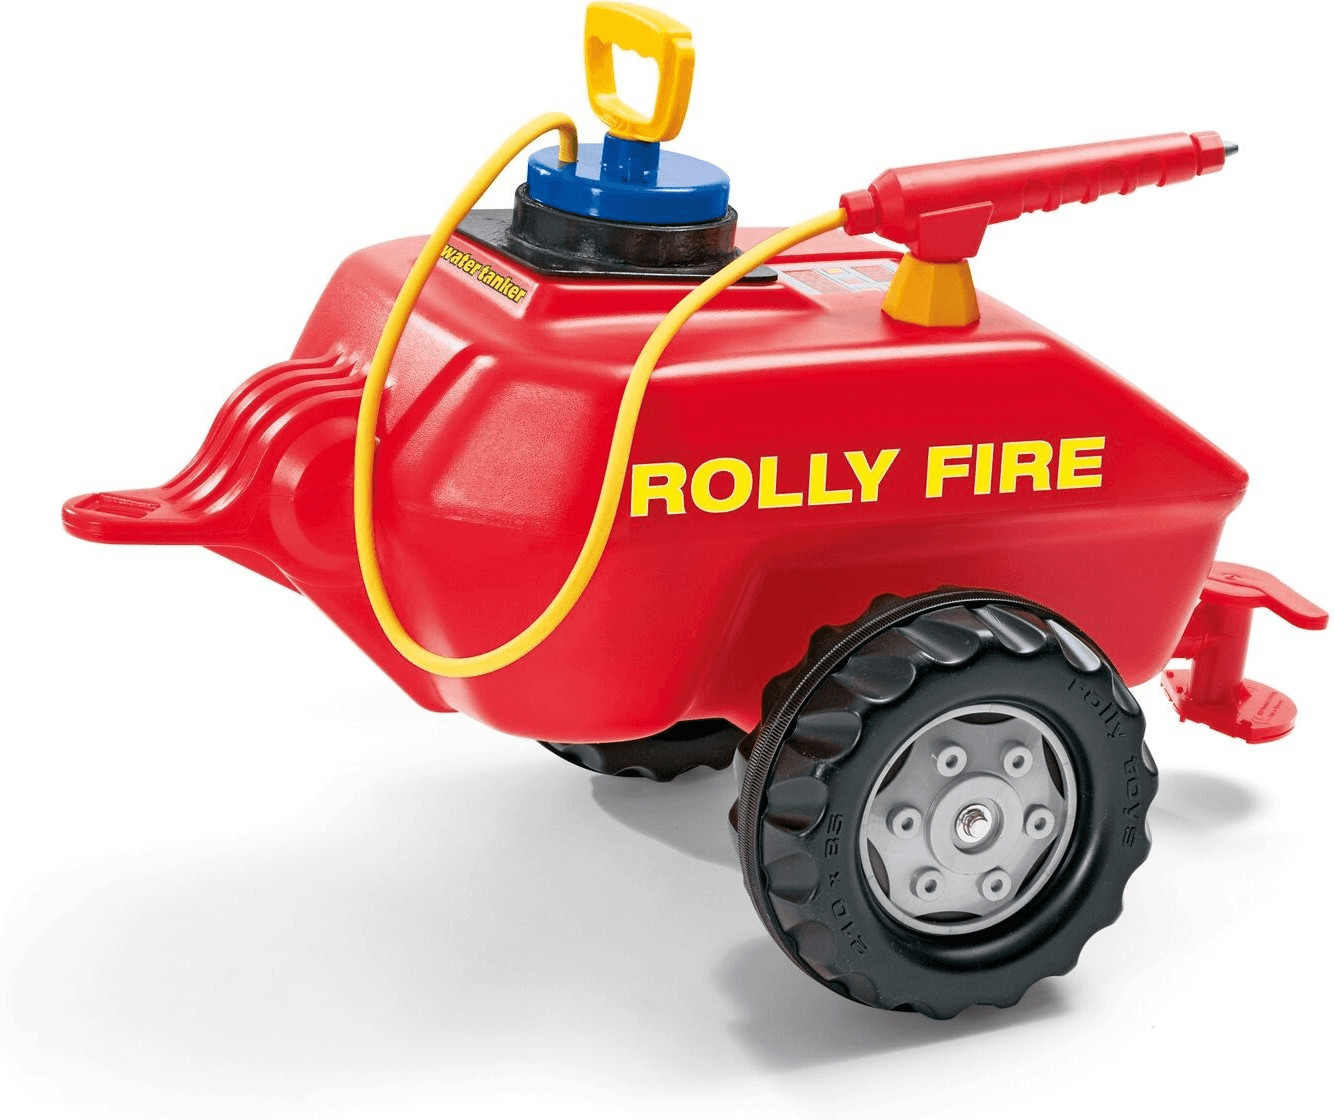 Rolly Toys rollyVacumax Fire (122967) ab 37,59 €